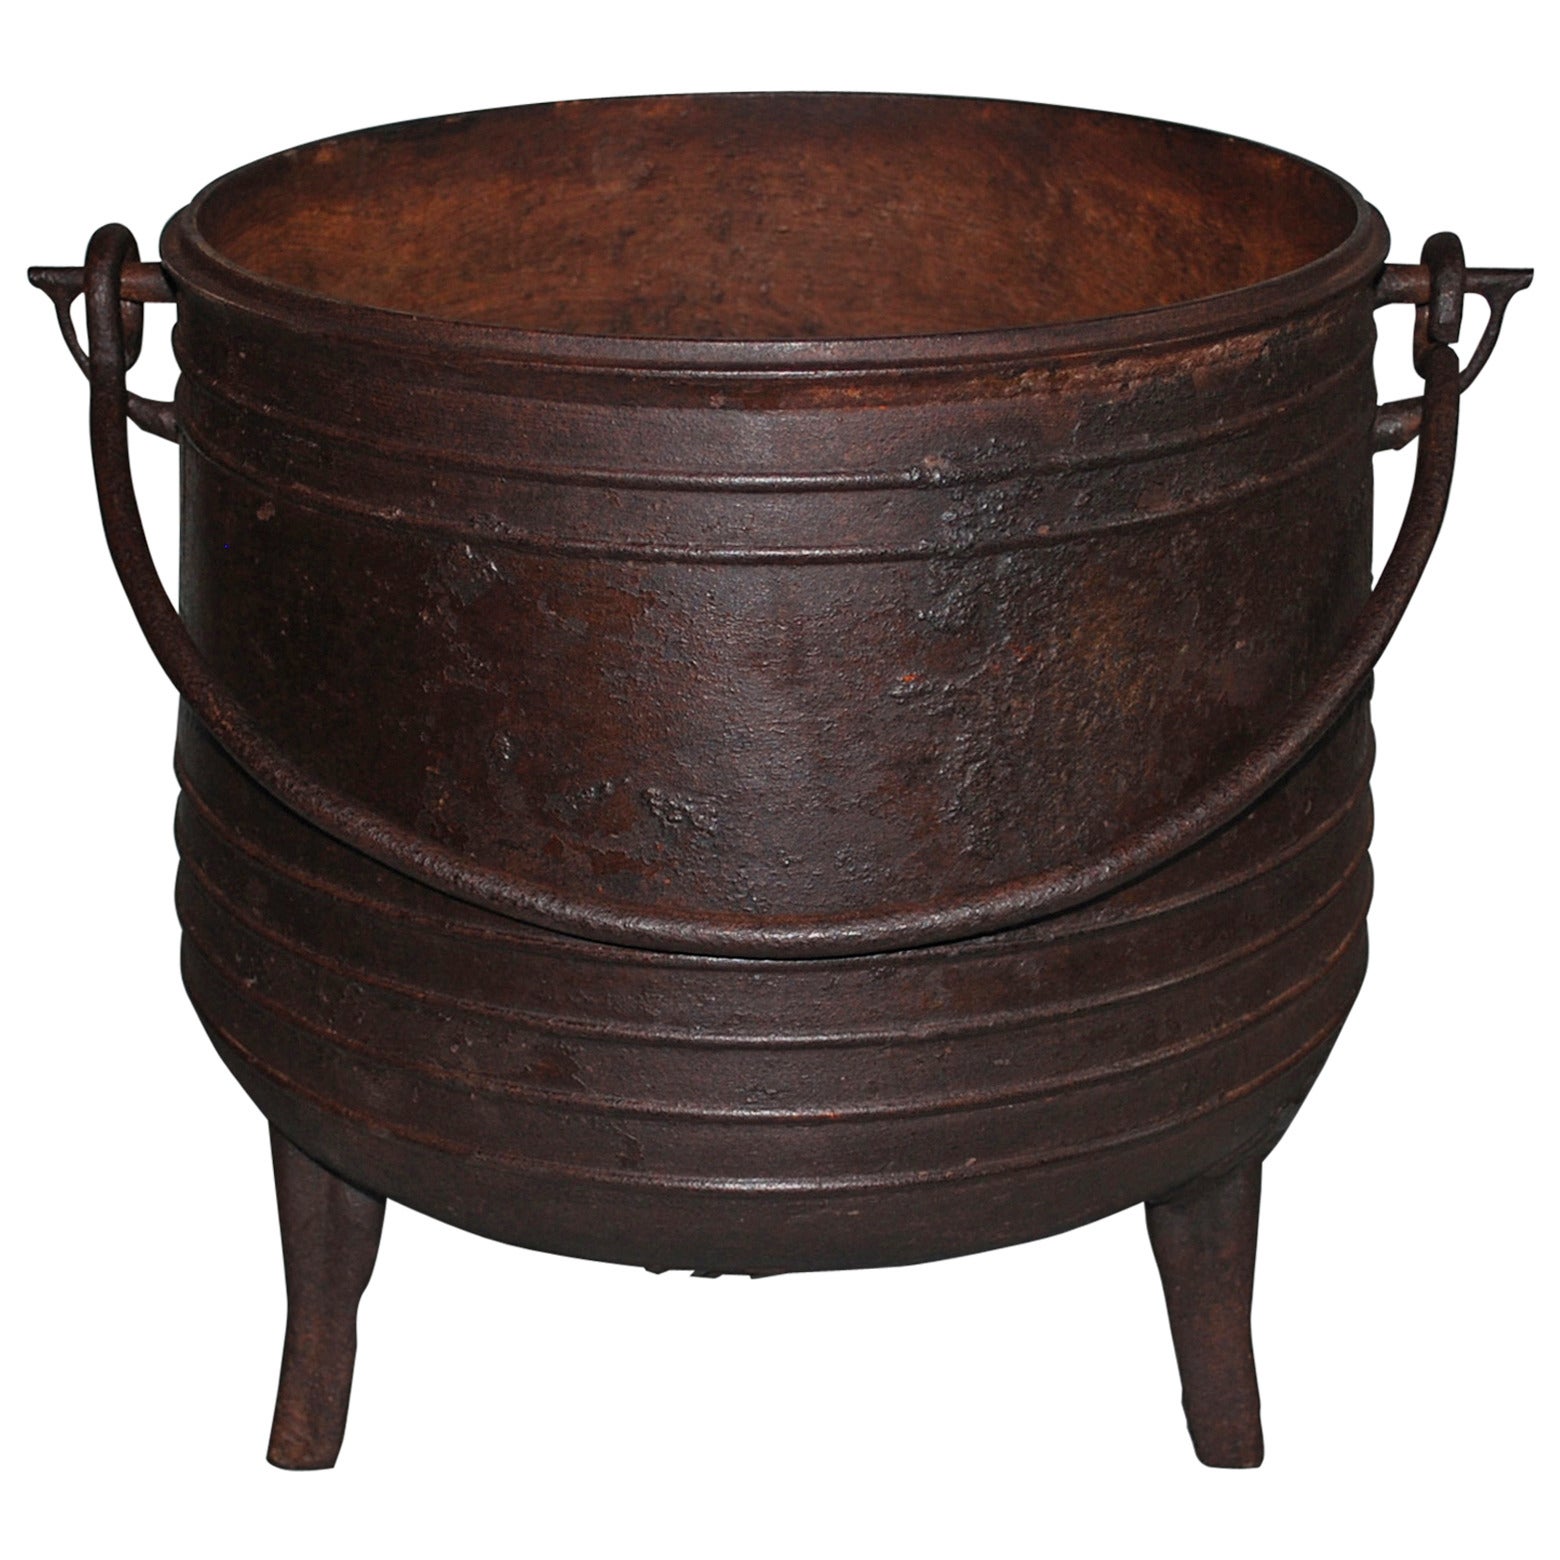 Early 19th Century Cast Iron Pot or Kettle